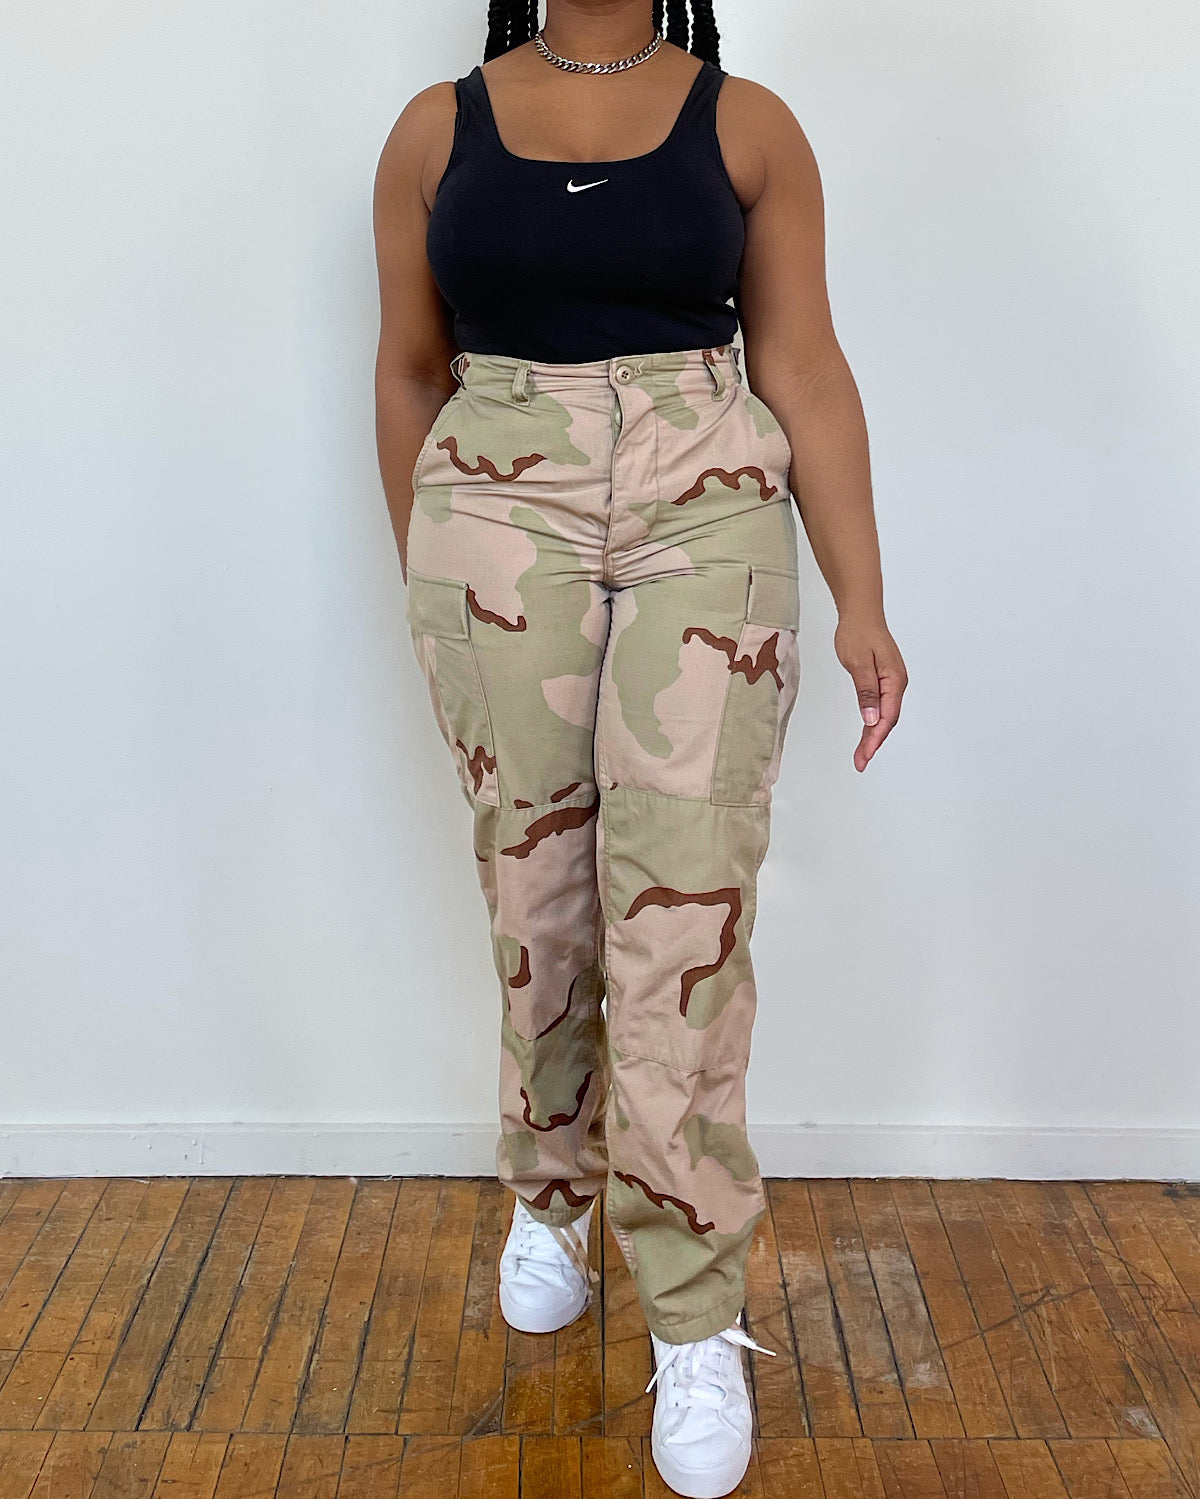 The Controversial Camo Pants Trend Is Officially Back | Who What Wear